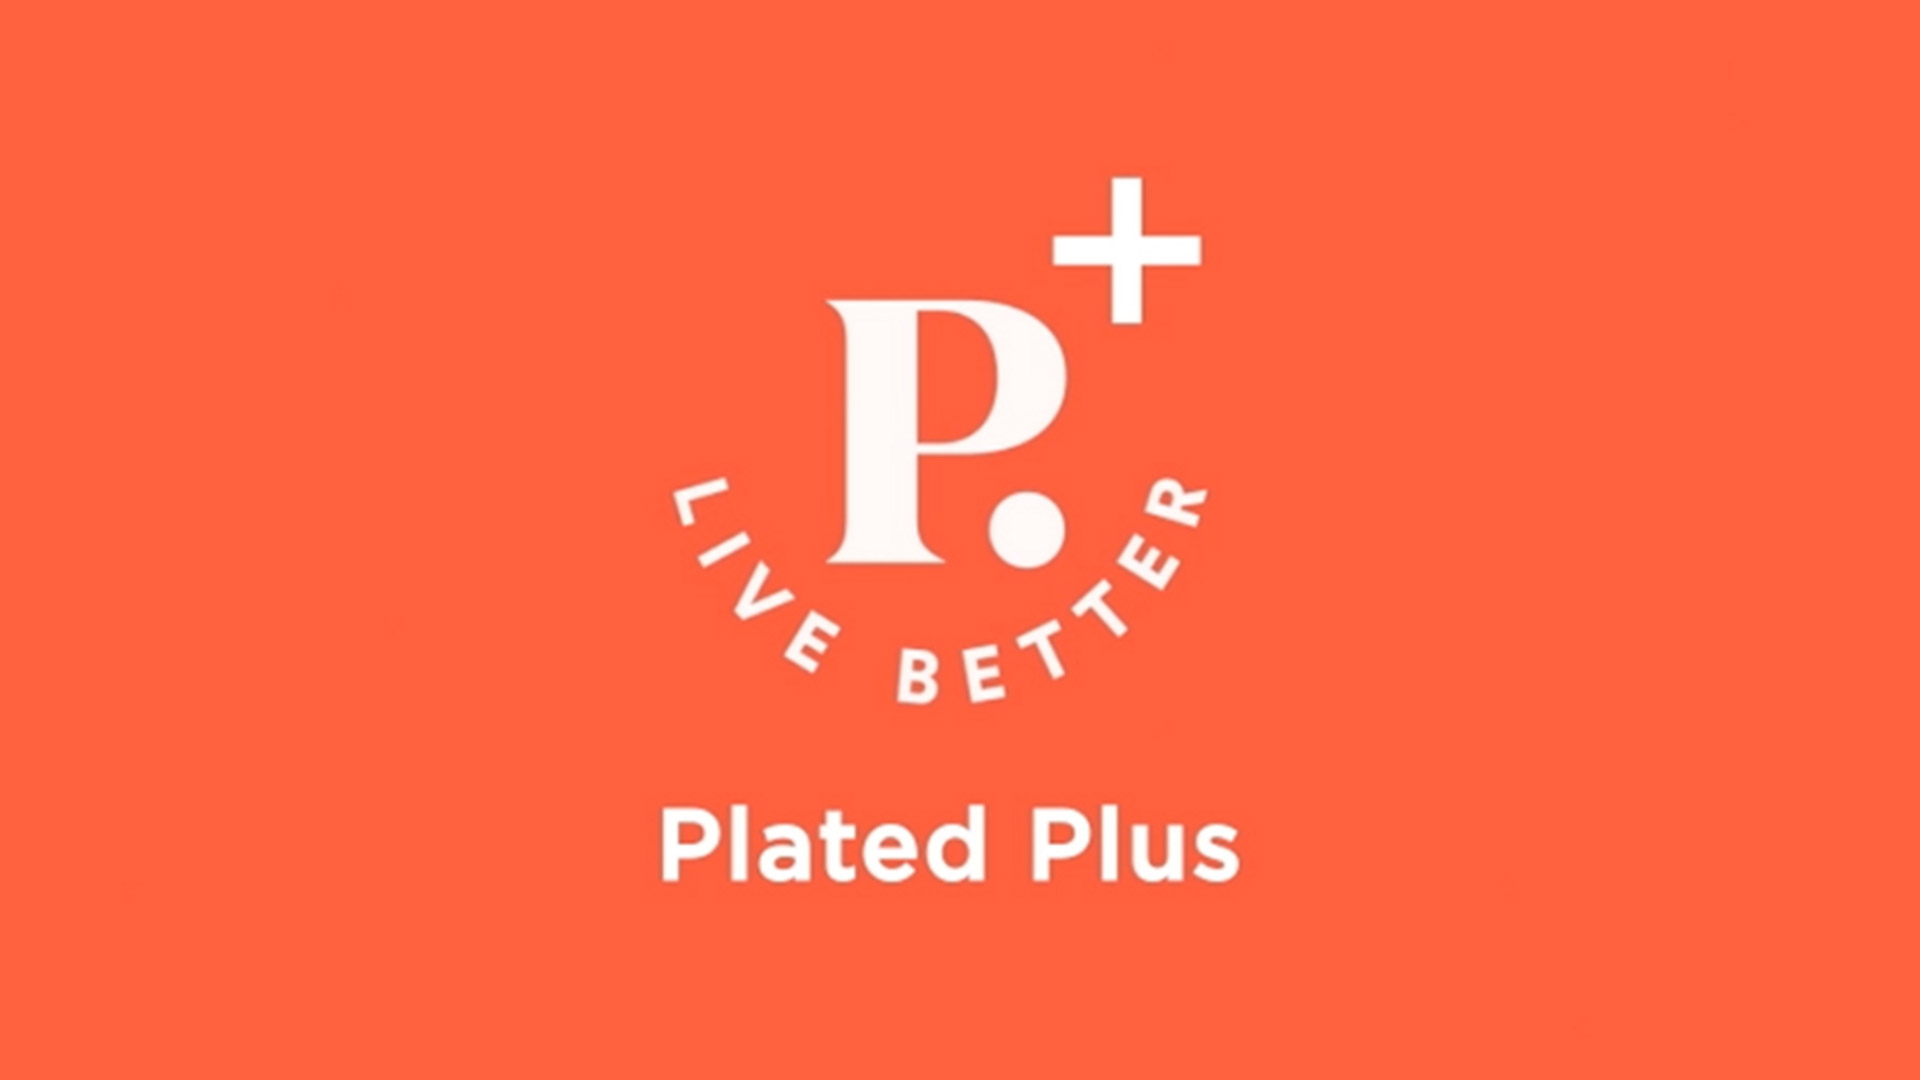 Plated Plus